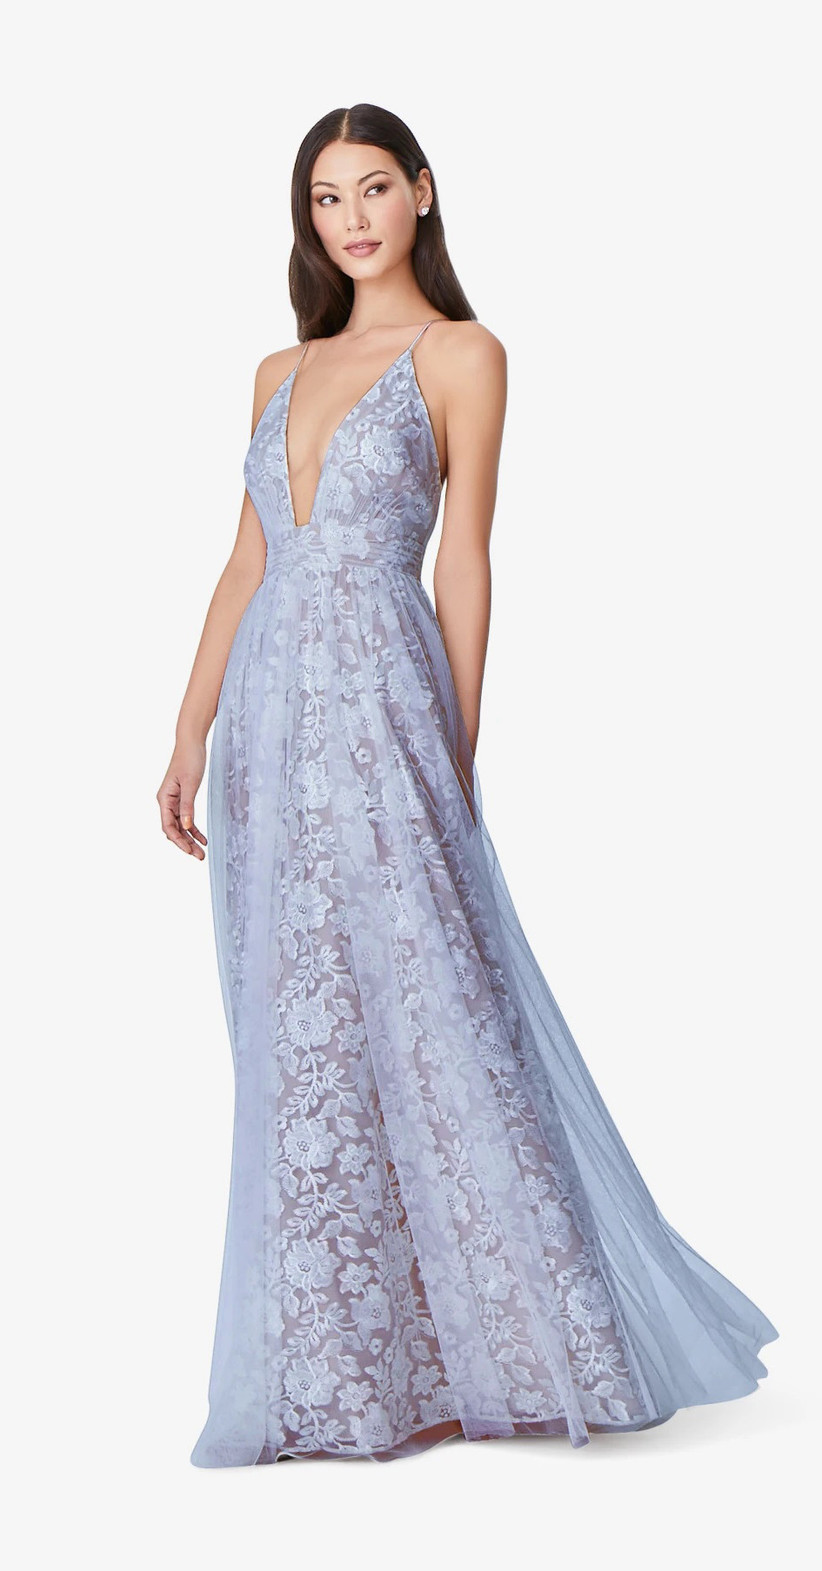 Model wearing deep V, floor-sweeping maxi with lacy blue floral print and sheer overlay